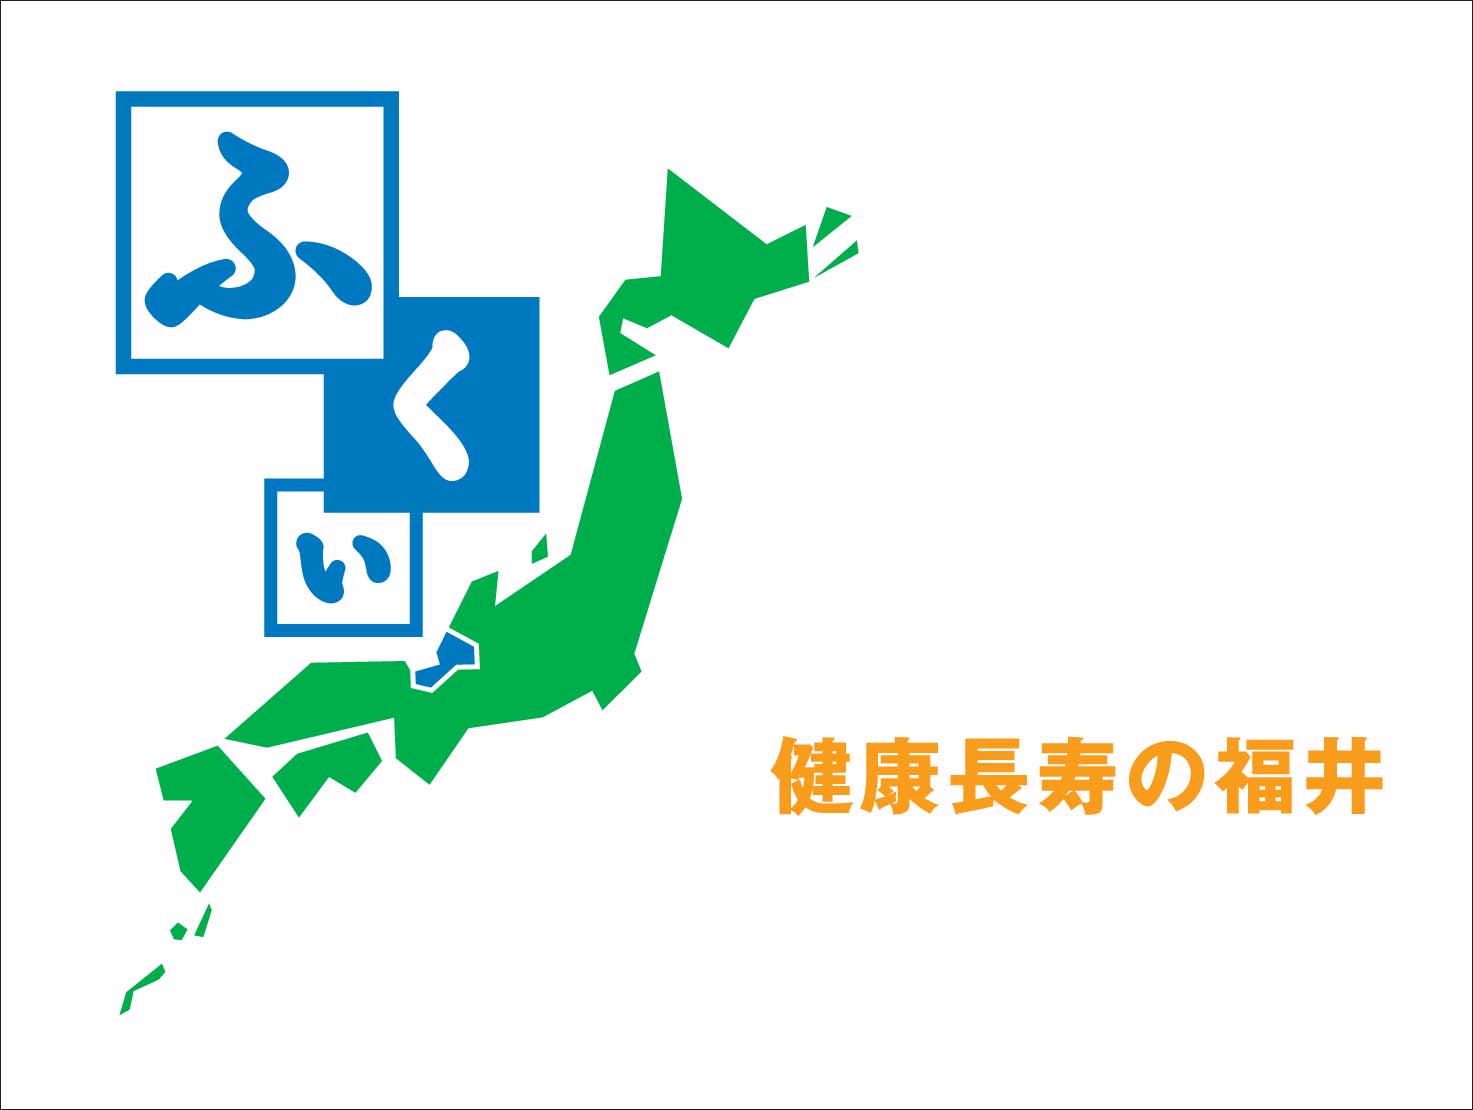 FUKUI PREFECTURAL GOVERNMENT INTERNATIONAL TOURISM OFFICE